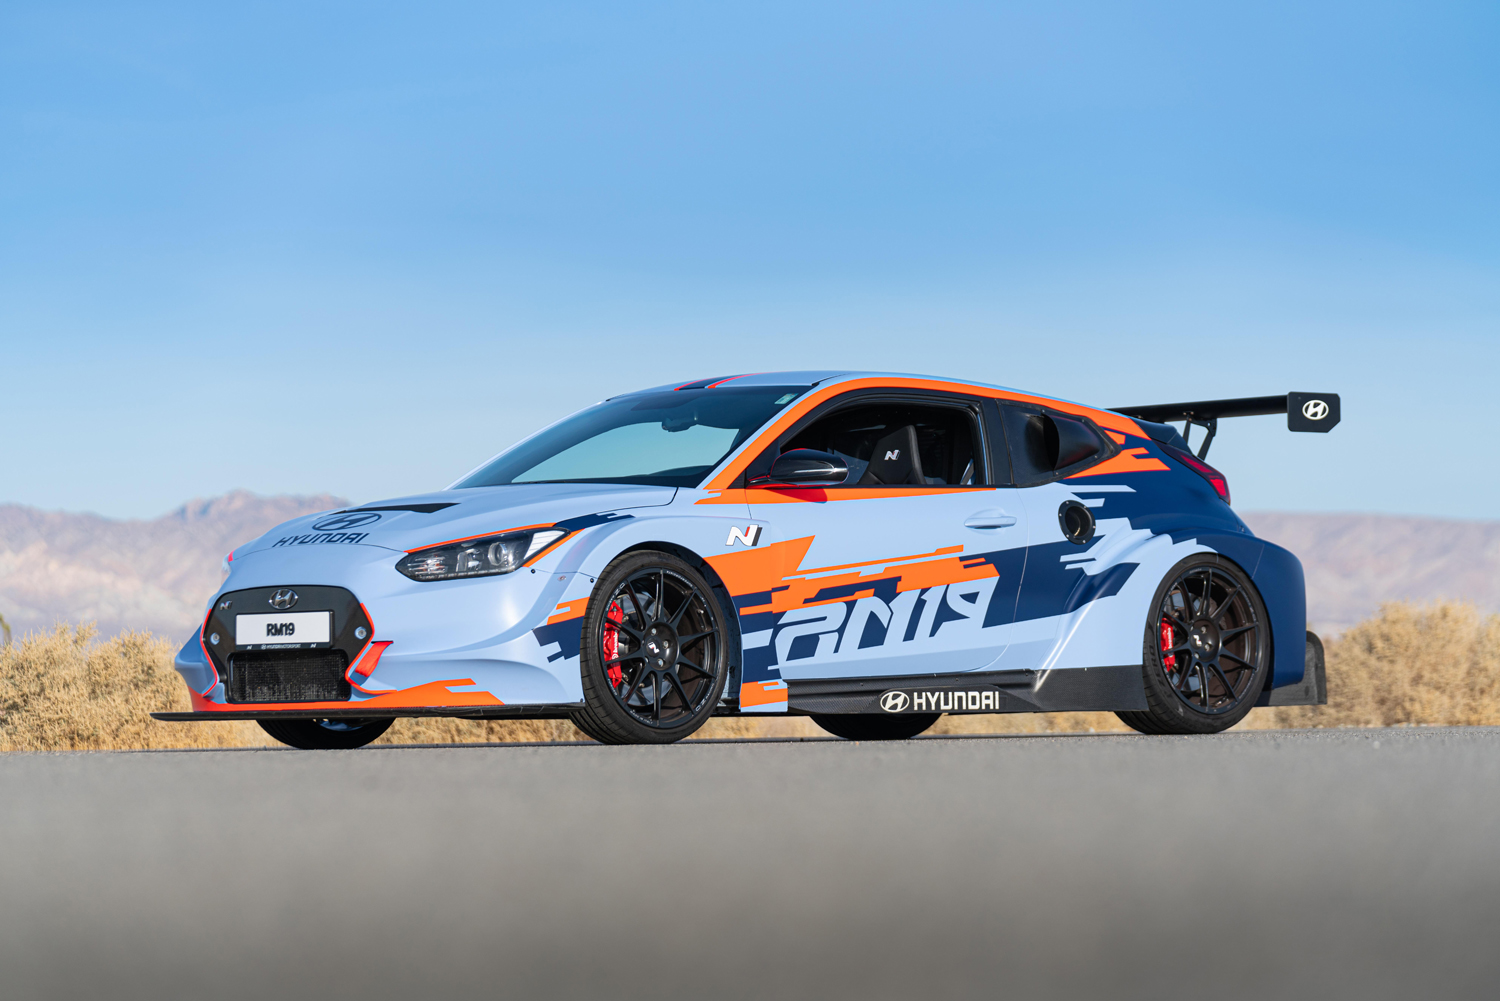 mid engined hyundai rm19 hot hatch unveiled at los angeles auto show 4